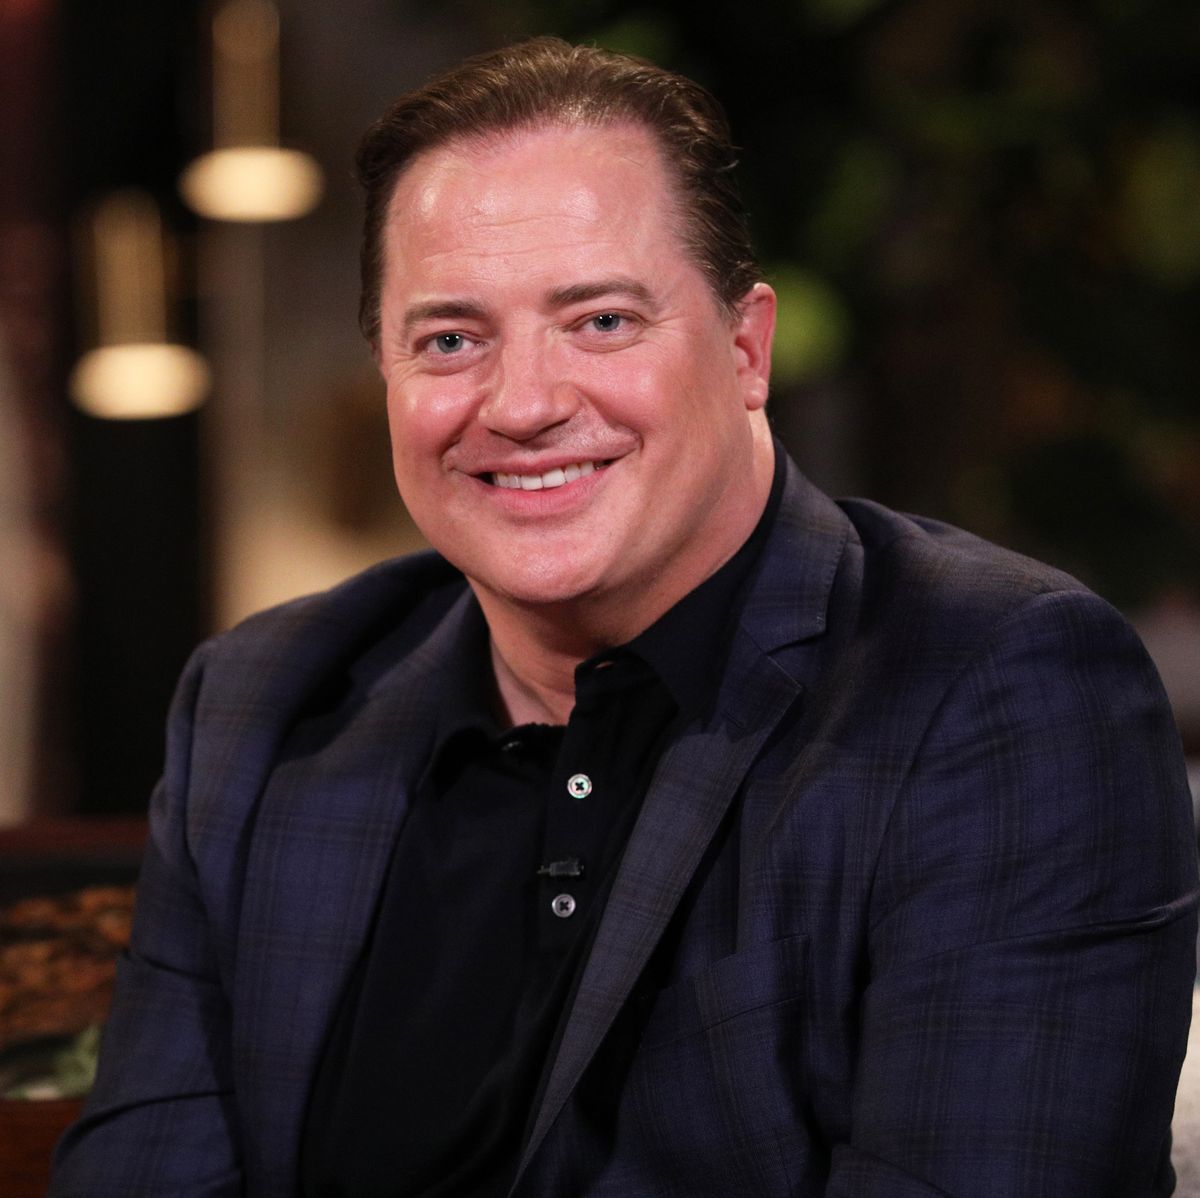 brendan fraser guest appearance on set of busy tonight